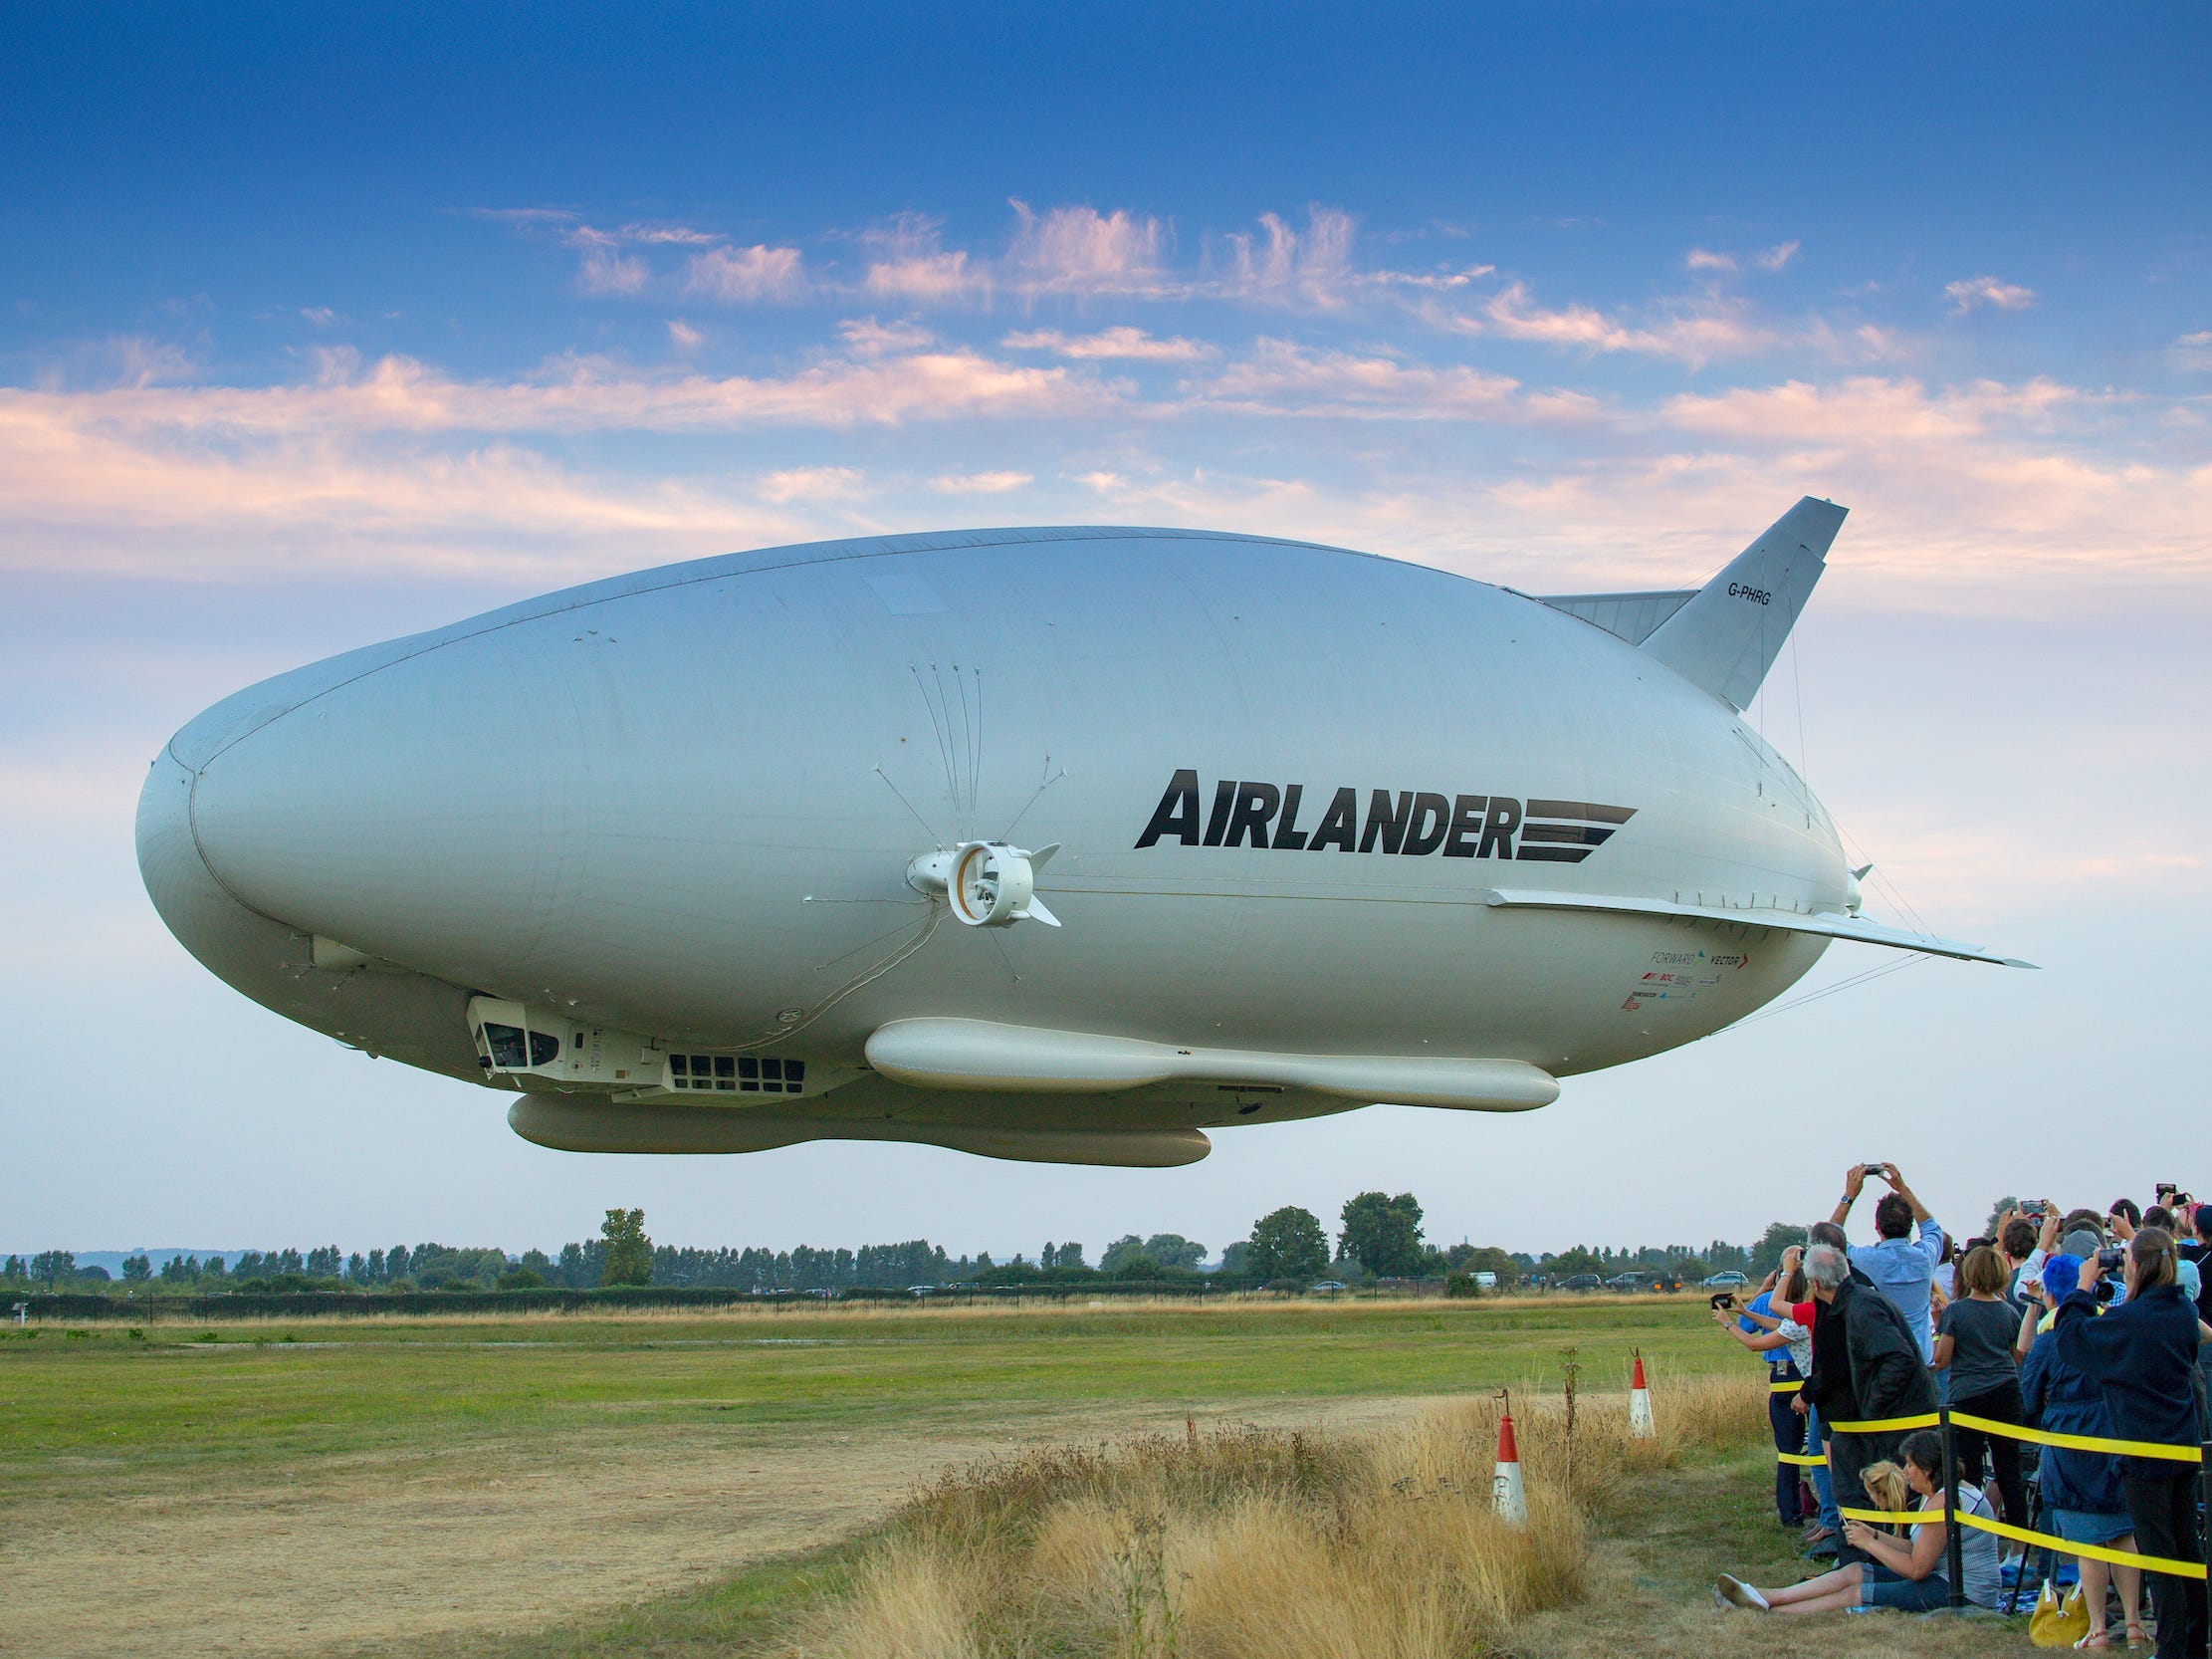 The Airlander 10 in the air